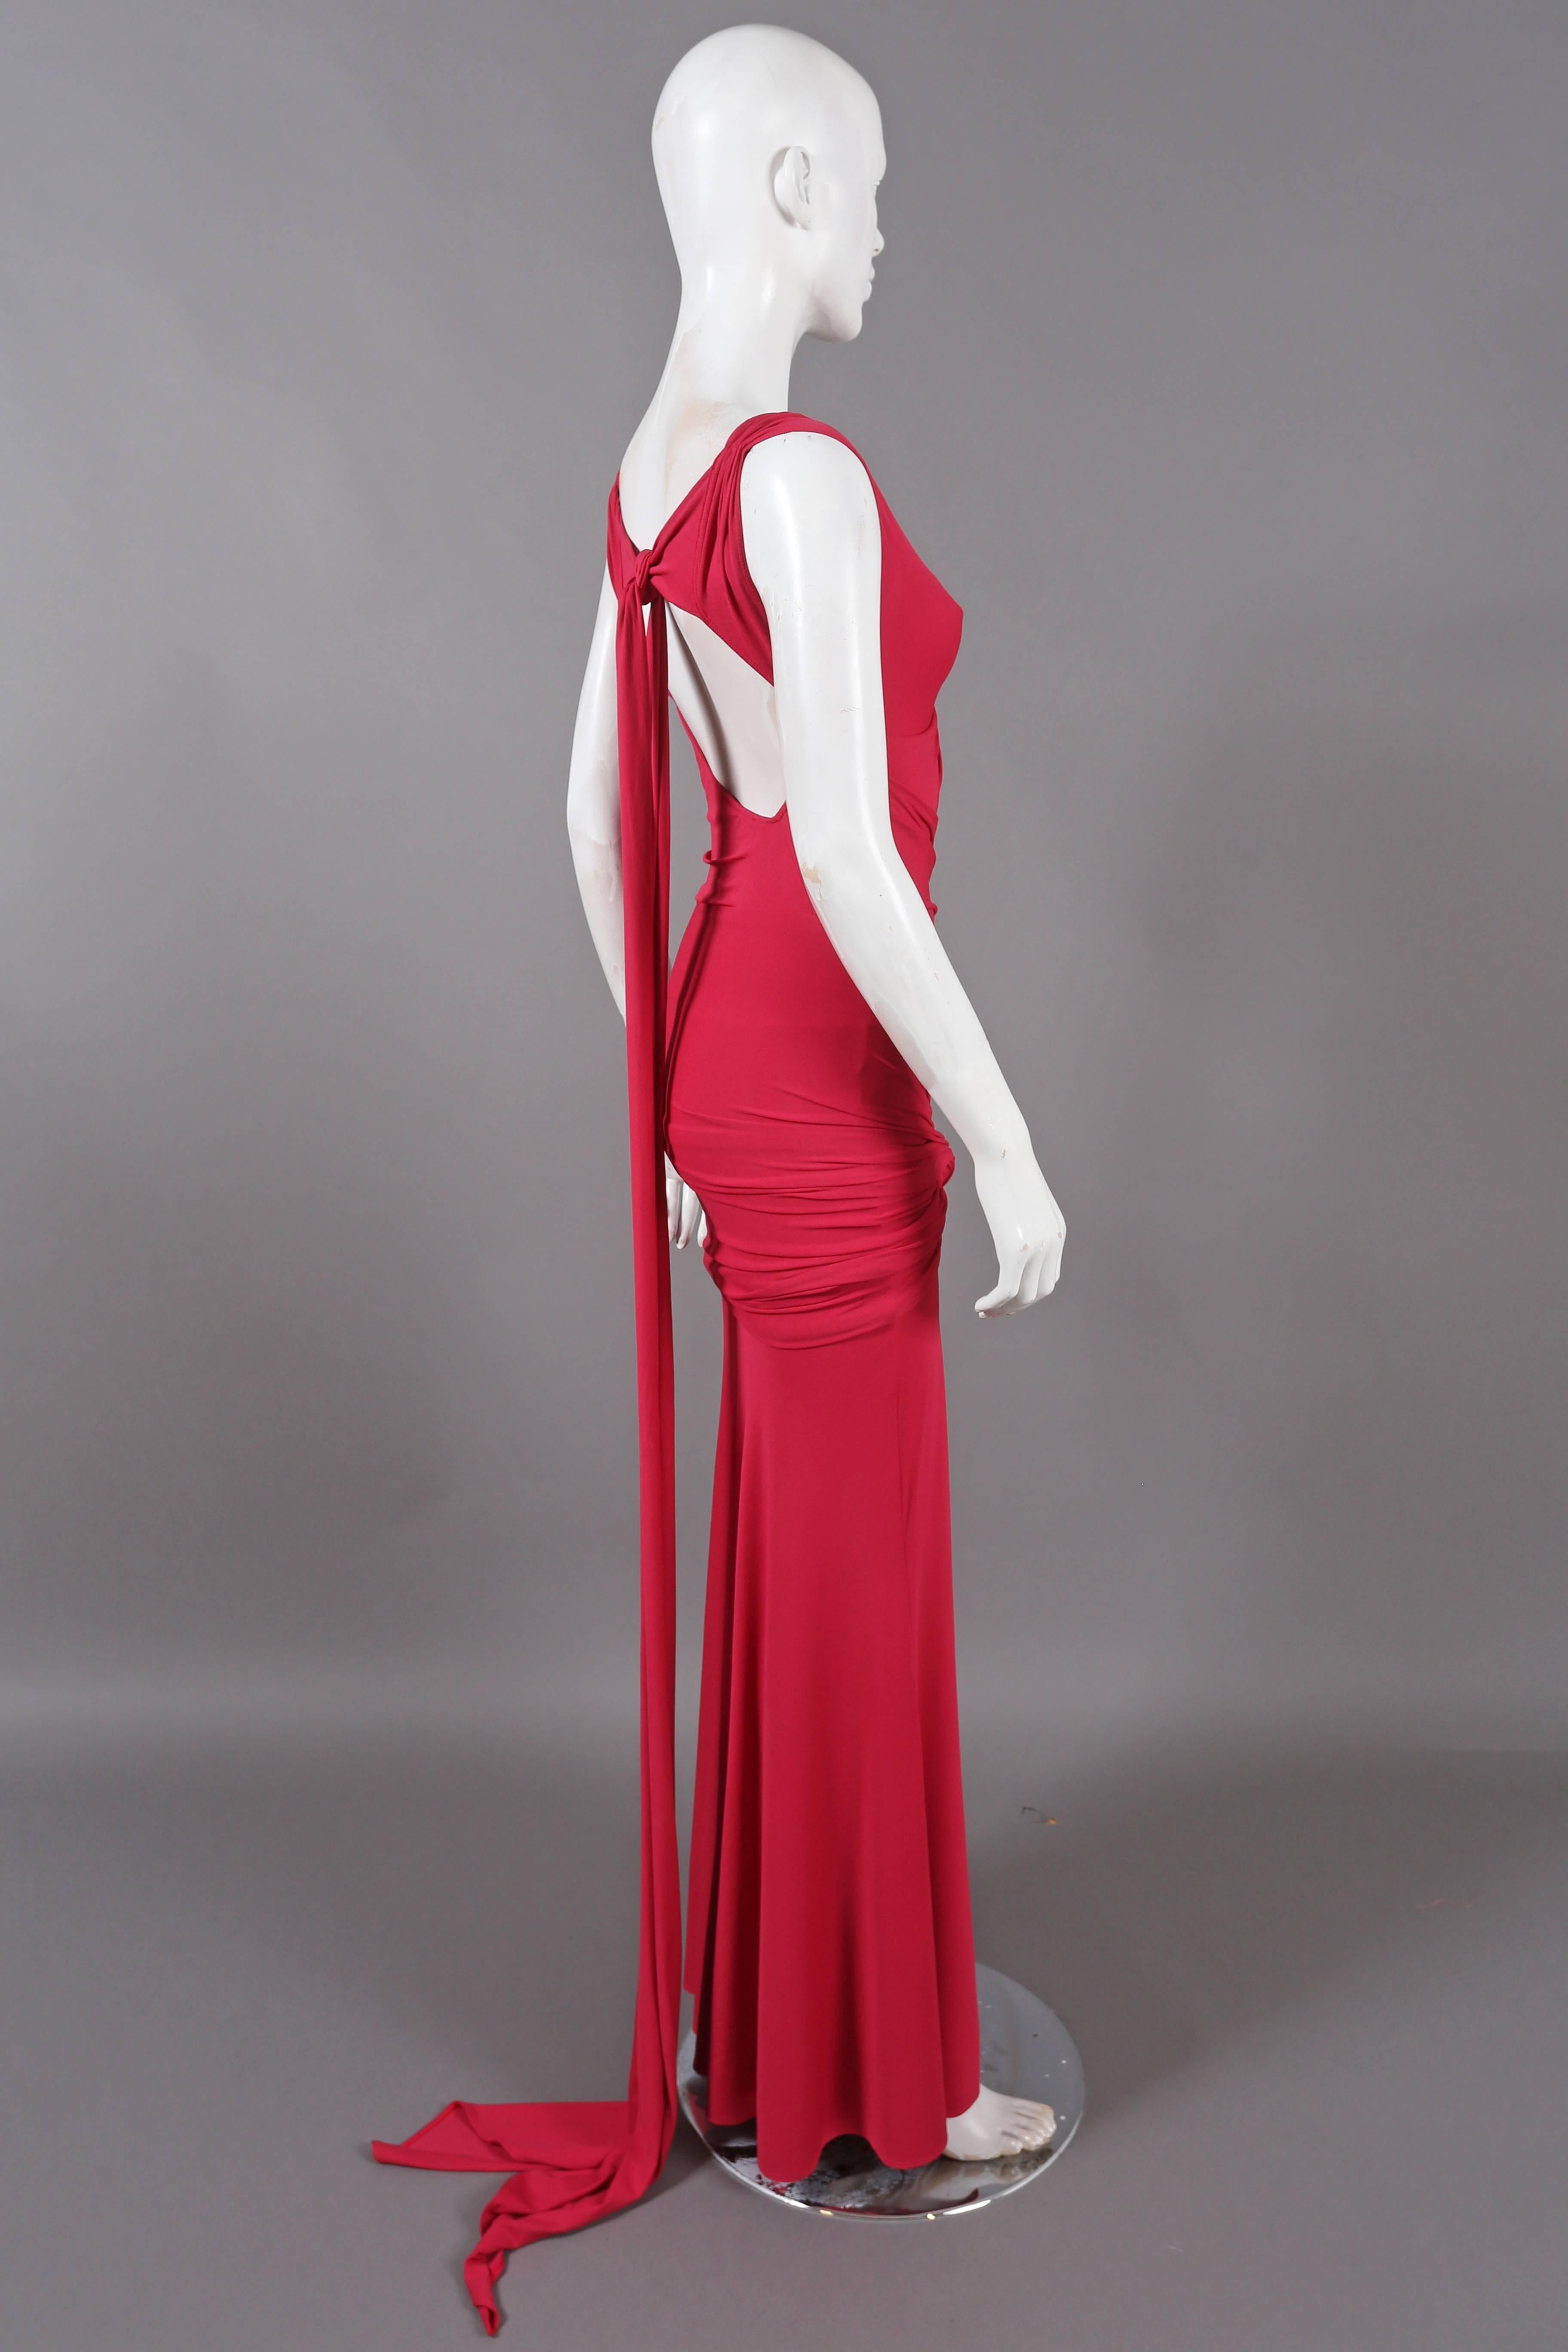 Magenta evening gown by DONNA KARAN, the dress feature 1930's inspired drapery and knotting, open back and long sash train. The dress can be styled in various ways. 

